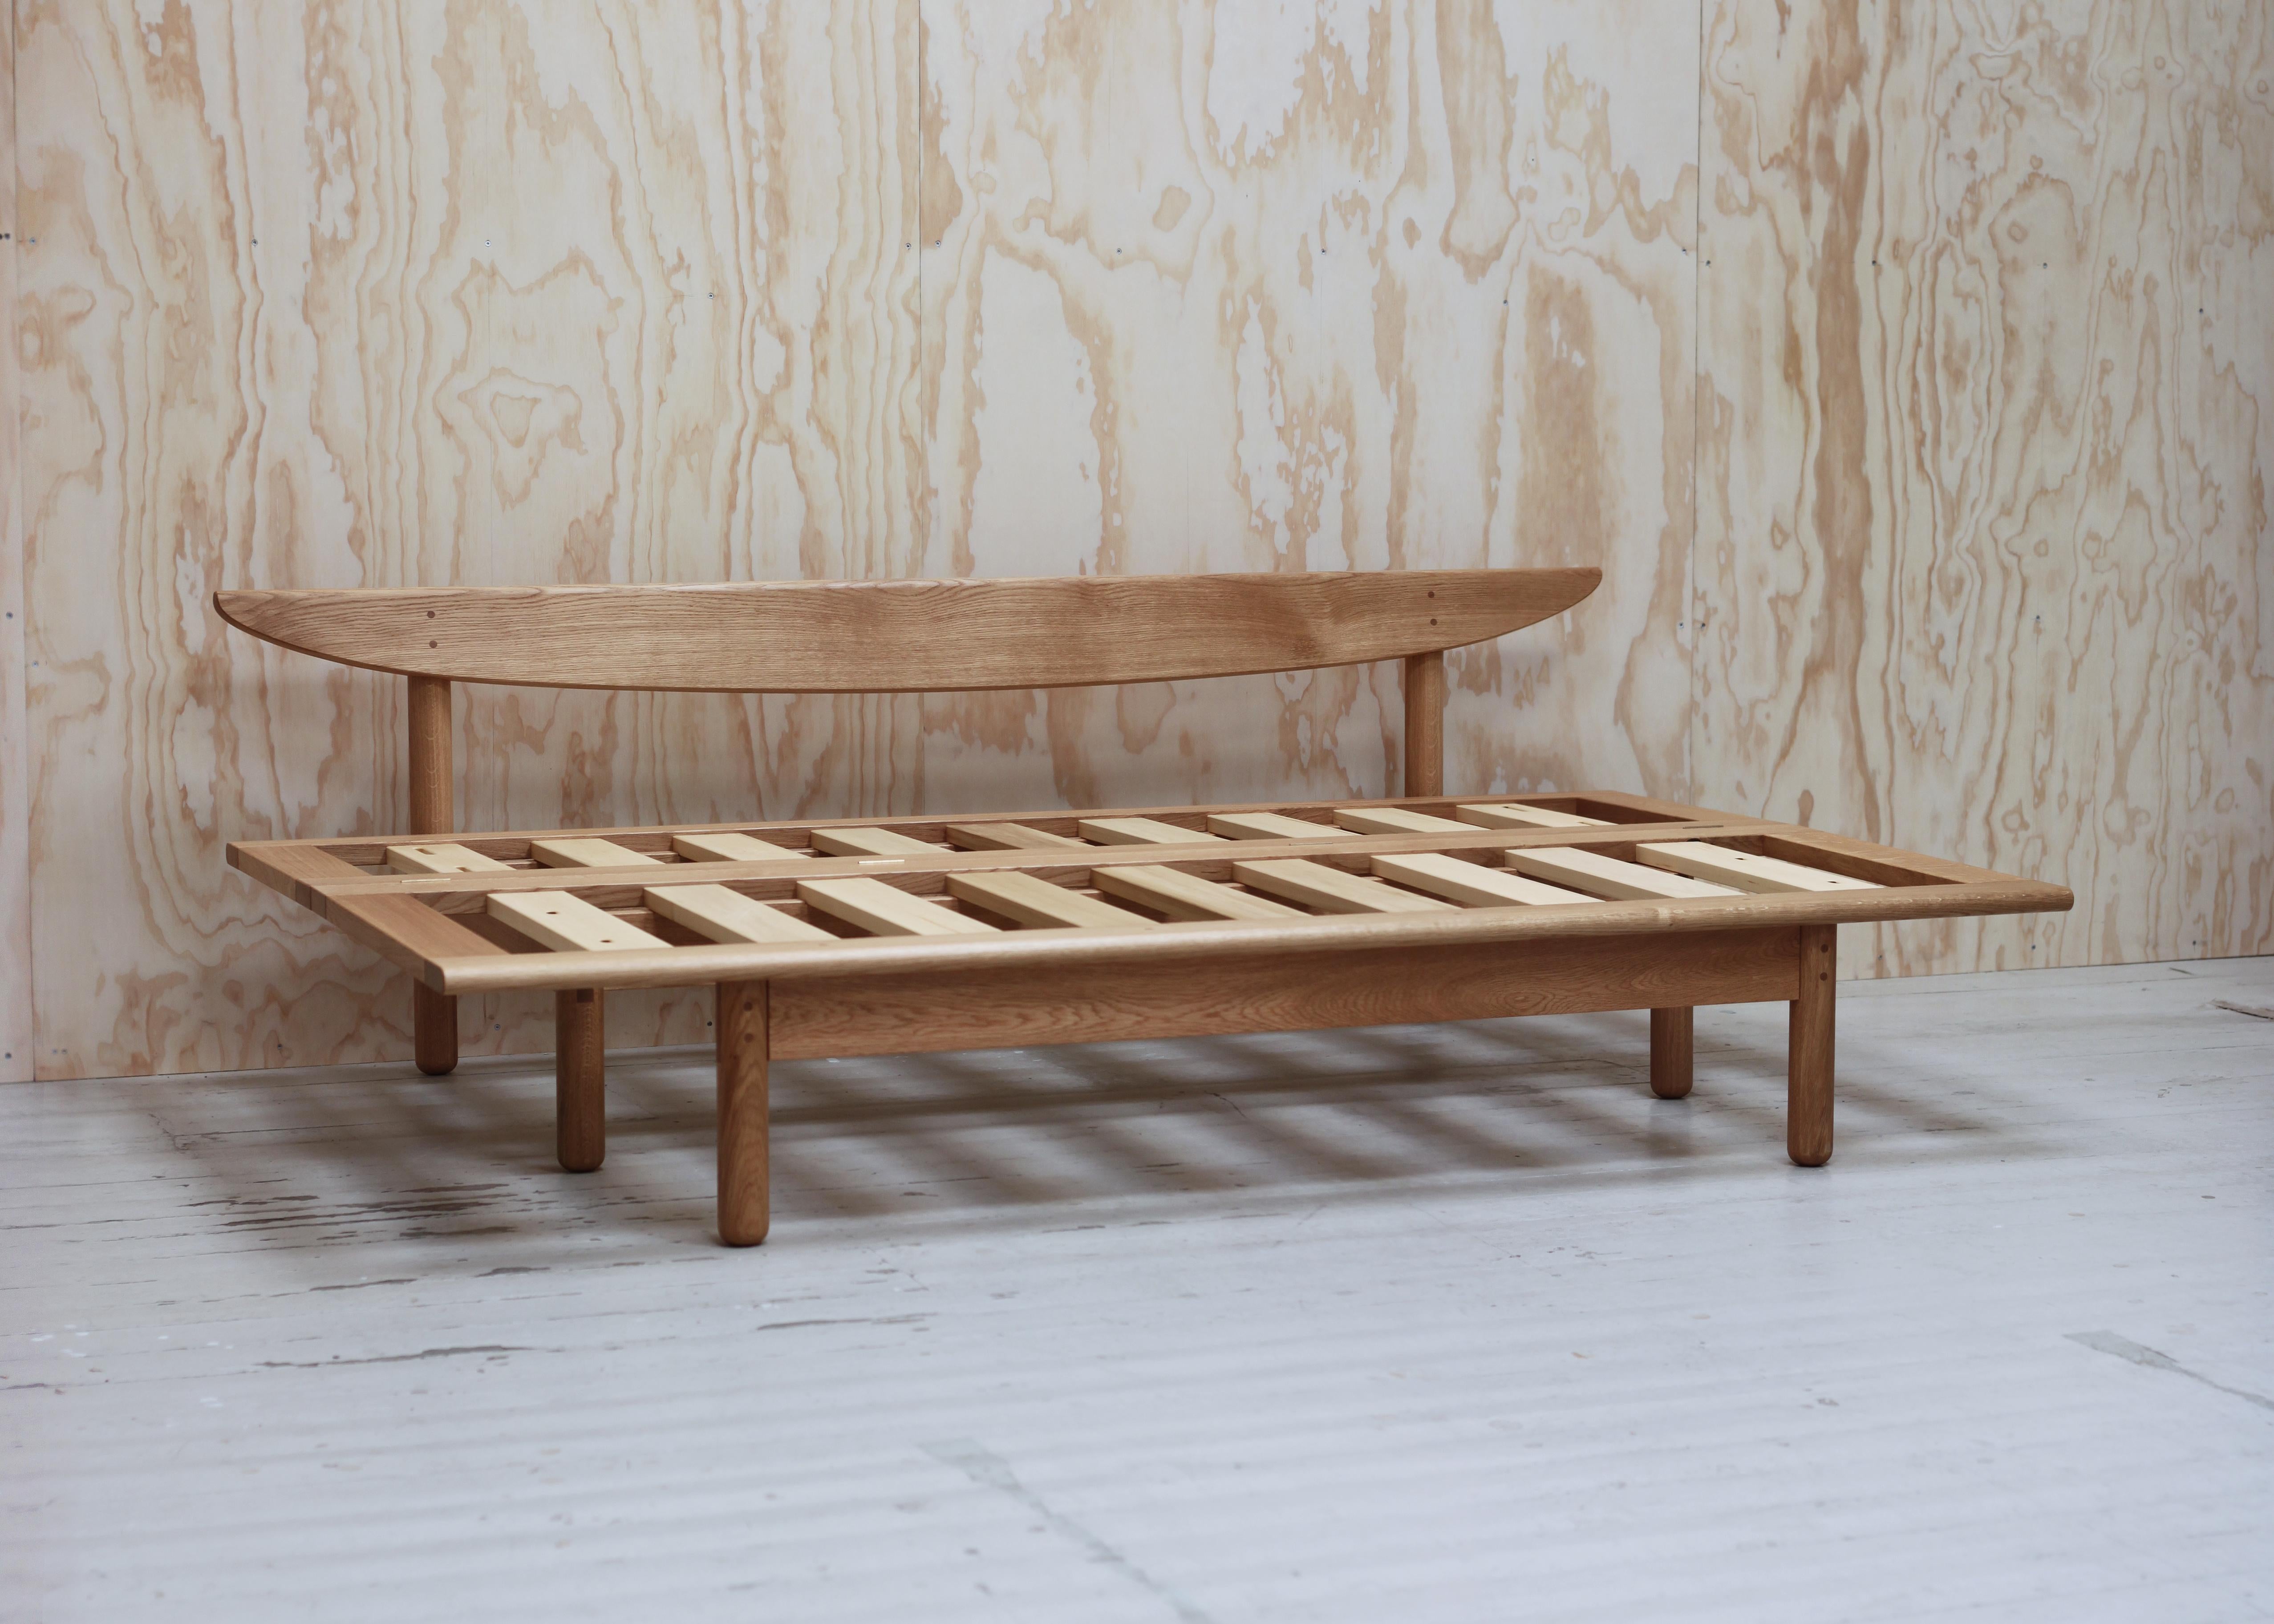 Handmade Ada Sofa, Contemporary Daybed/Futon - Oak, Wool Fabric - by BACD studio In New Condition For Sale In Værløse, DK